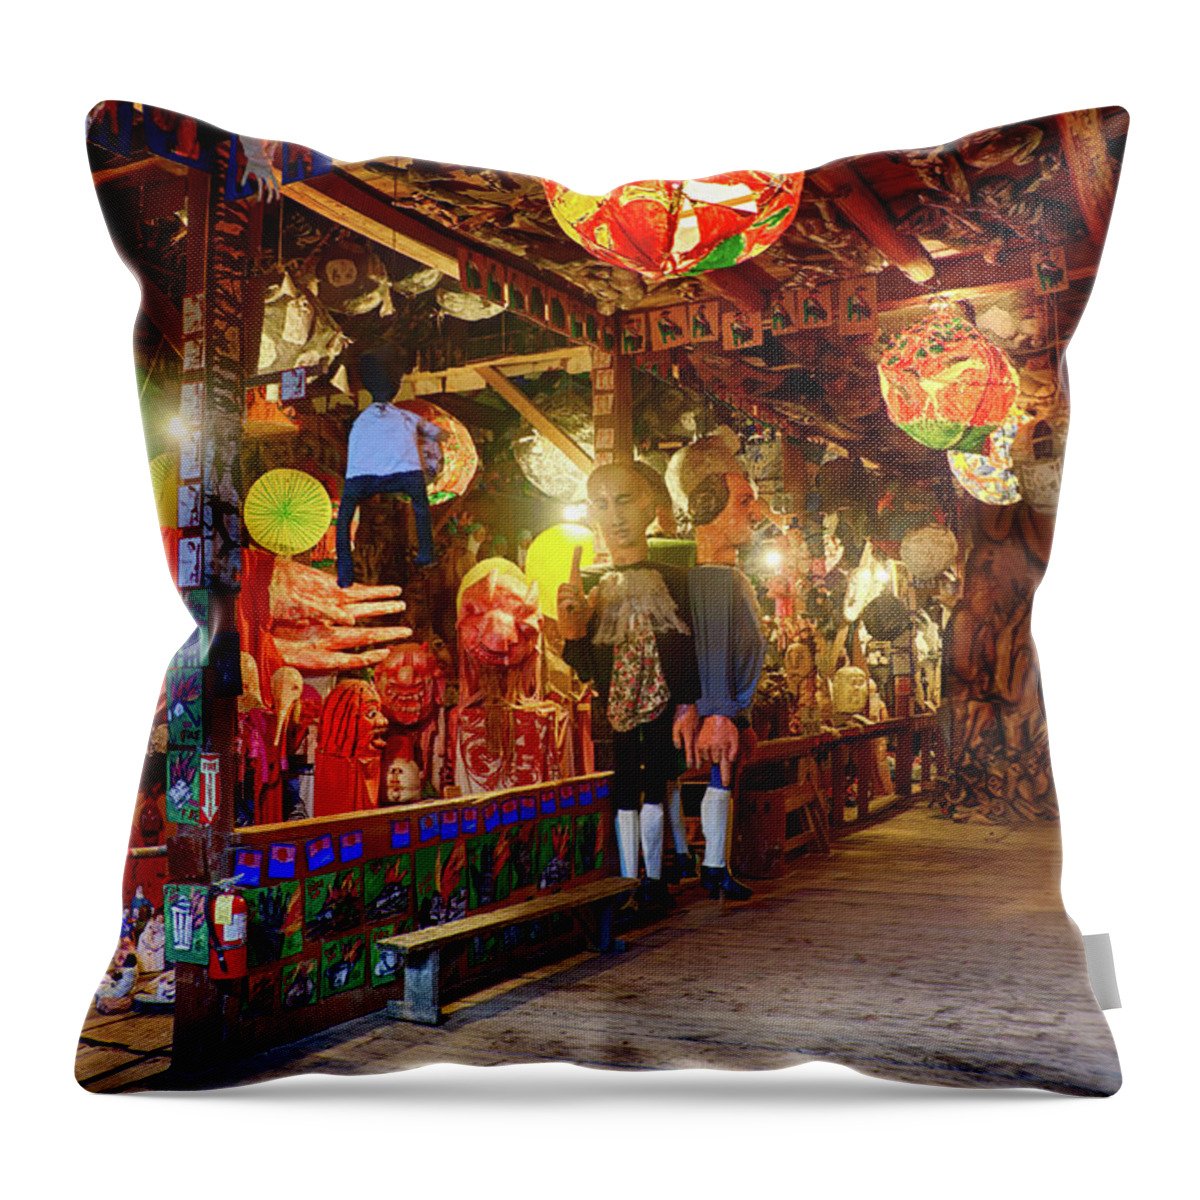 Activism Throw Pillow featuring the photograph Bread and Puppet Museum Art by Jeff Folger